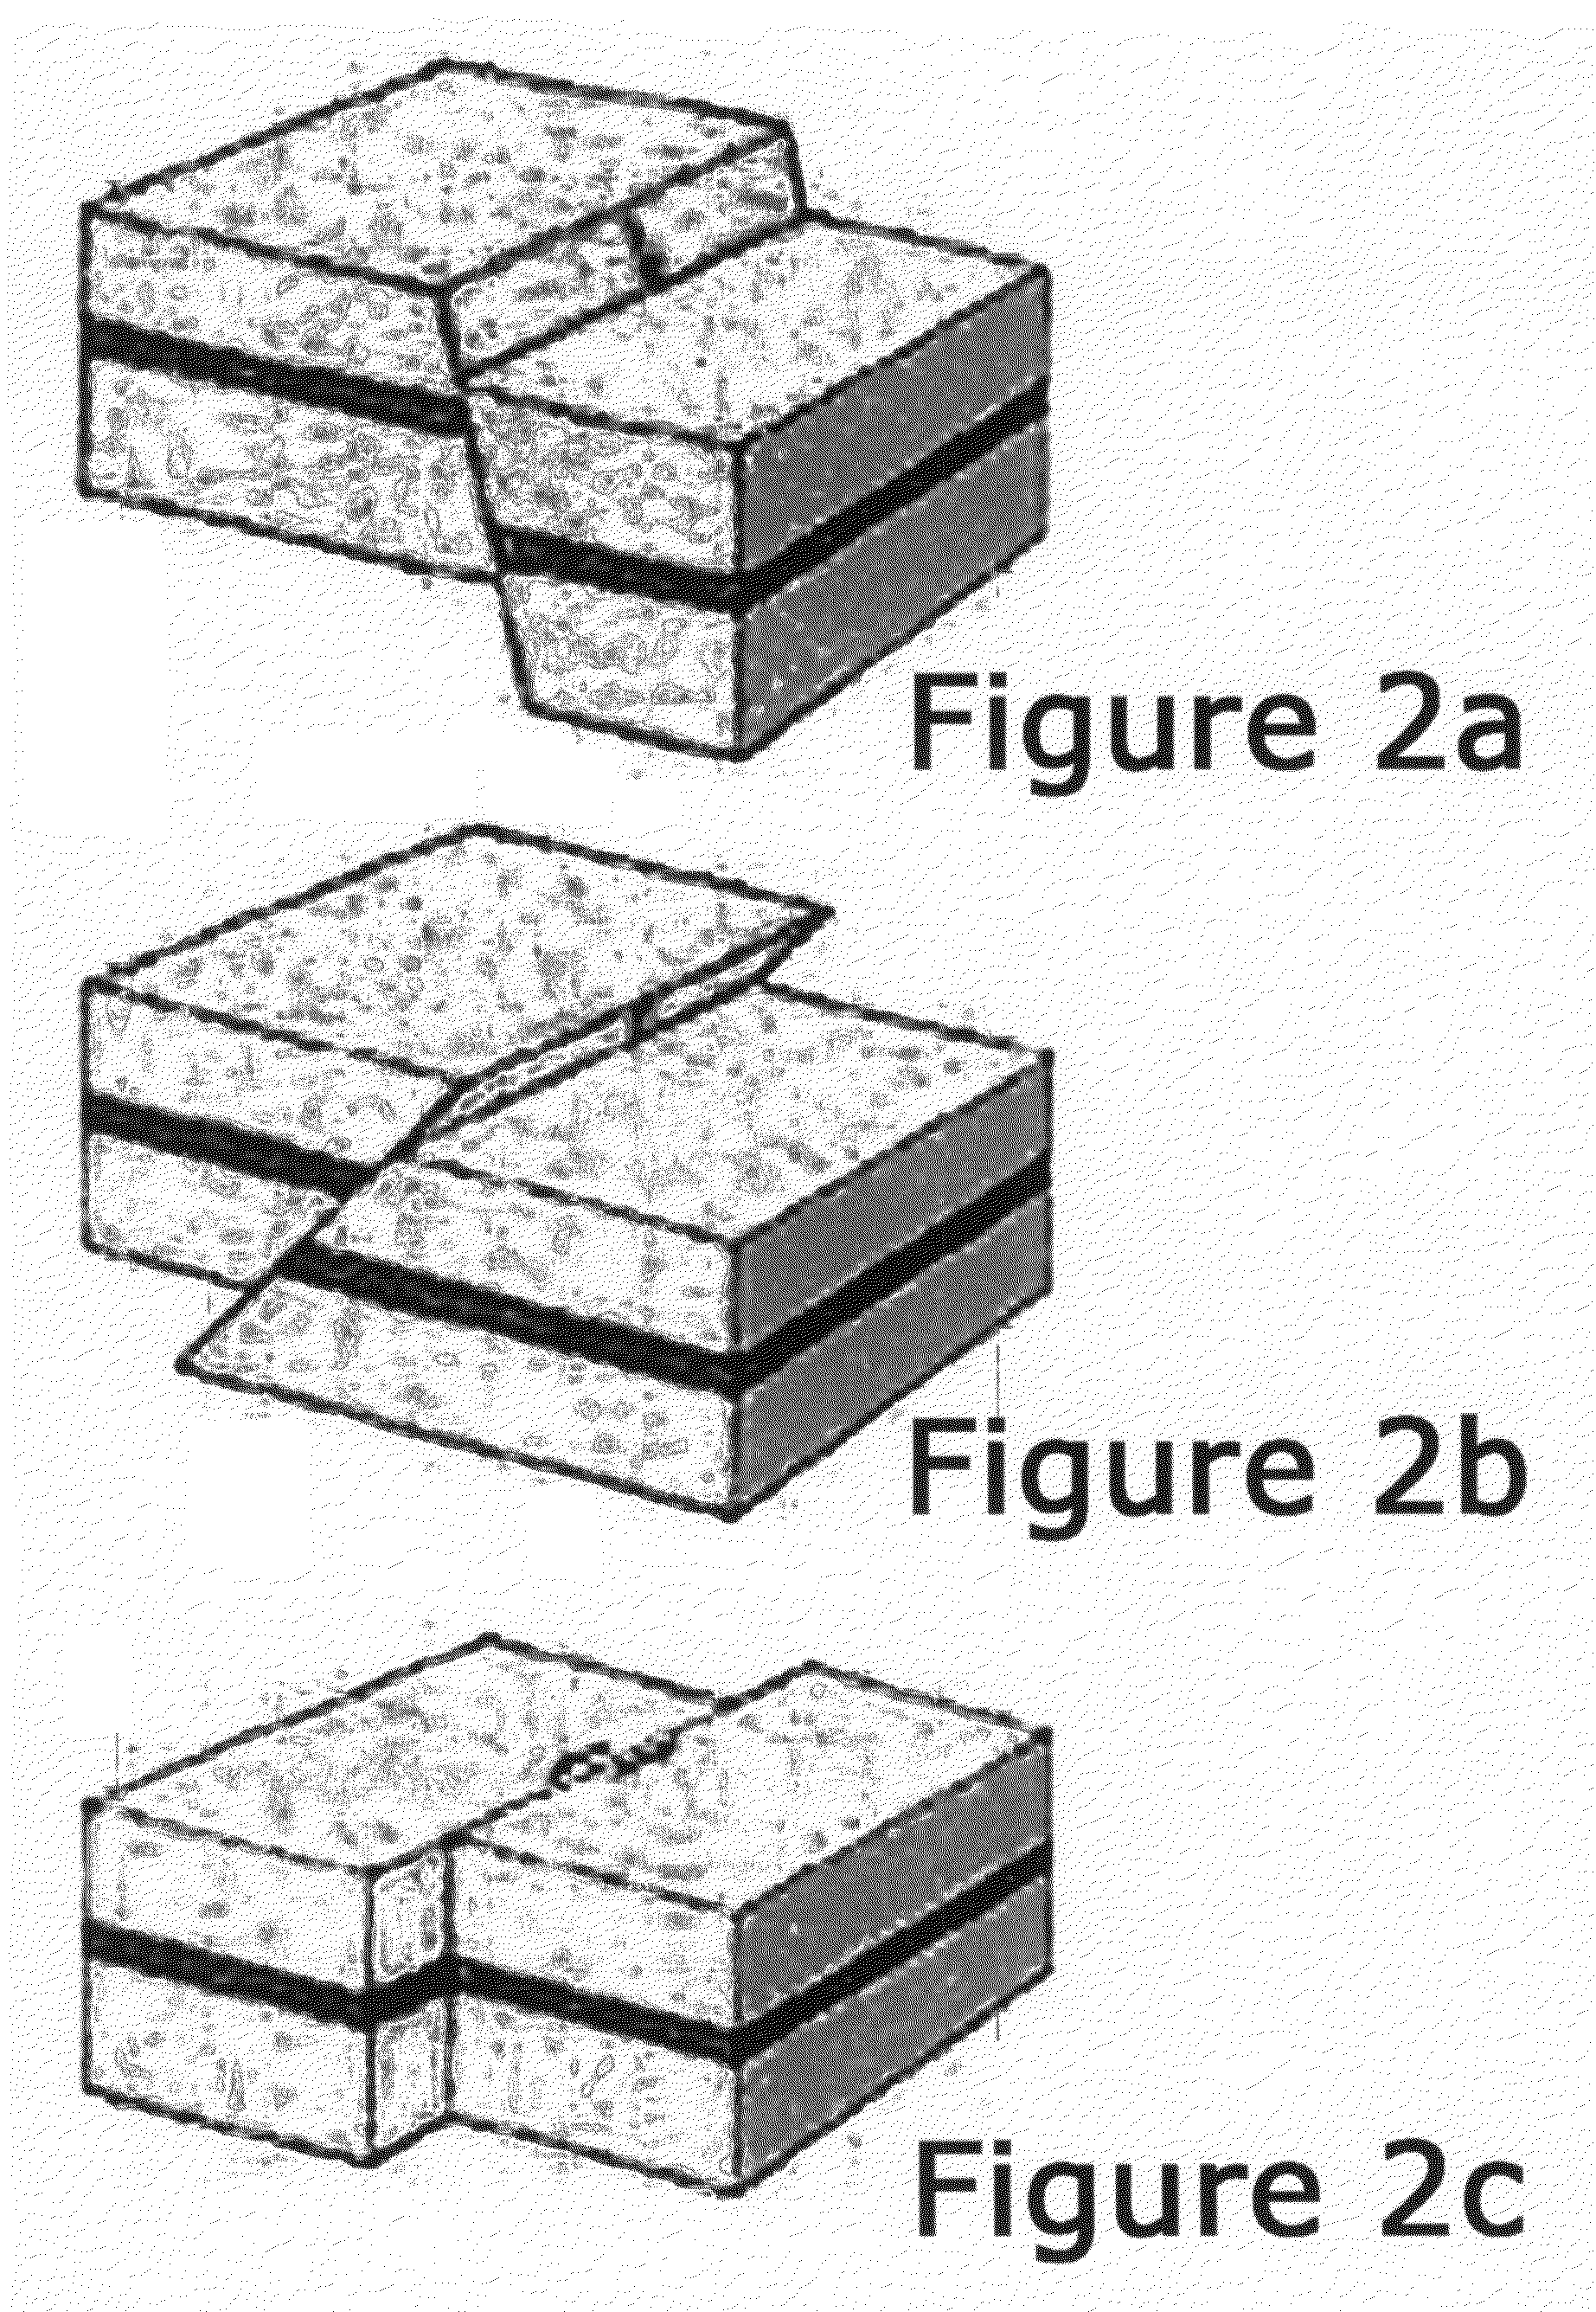 Method and apparatus for remote characterization of faults in the vicinity of boreholes